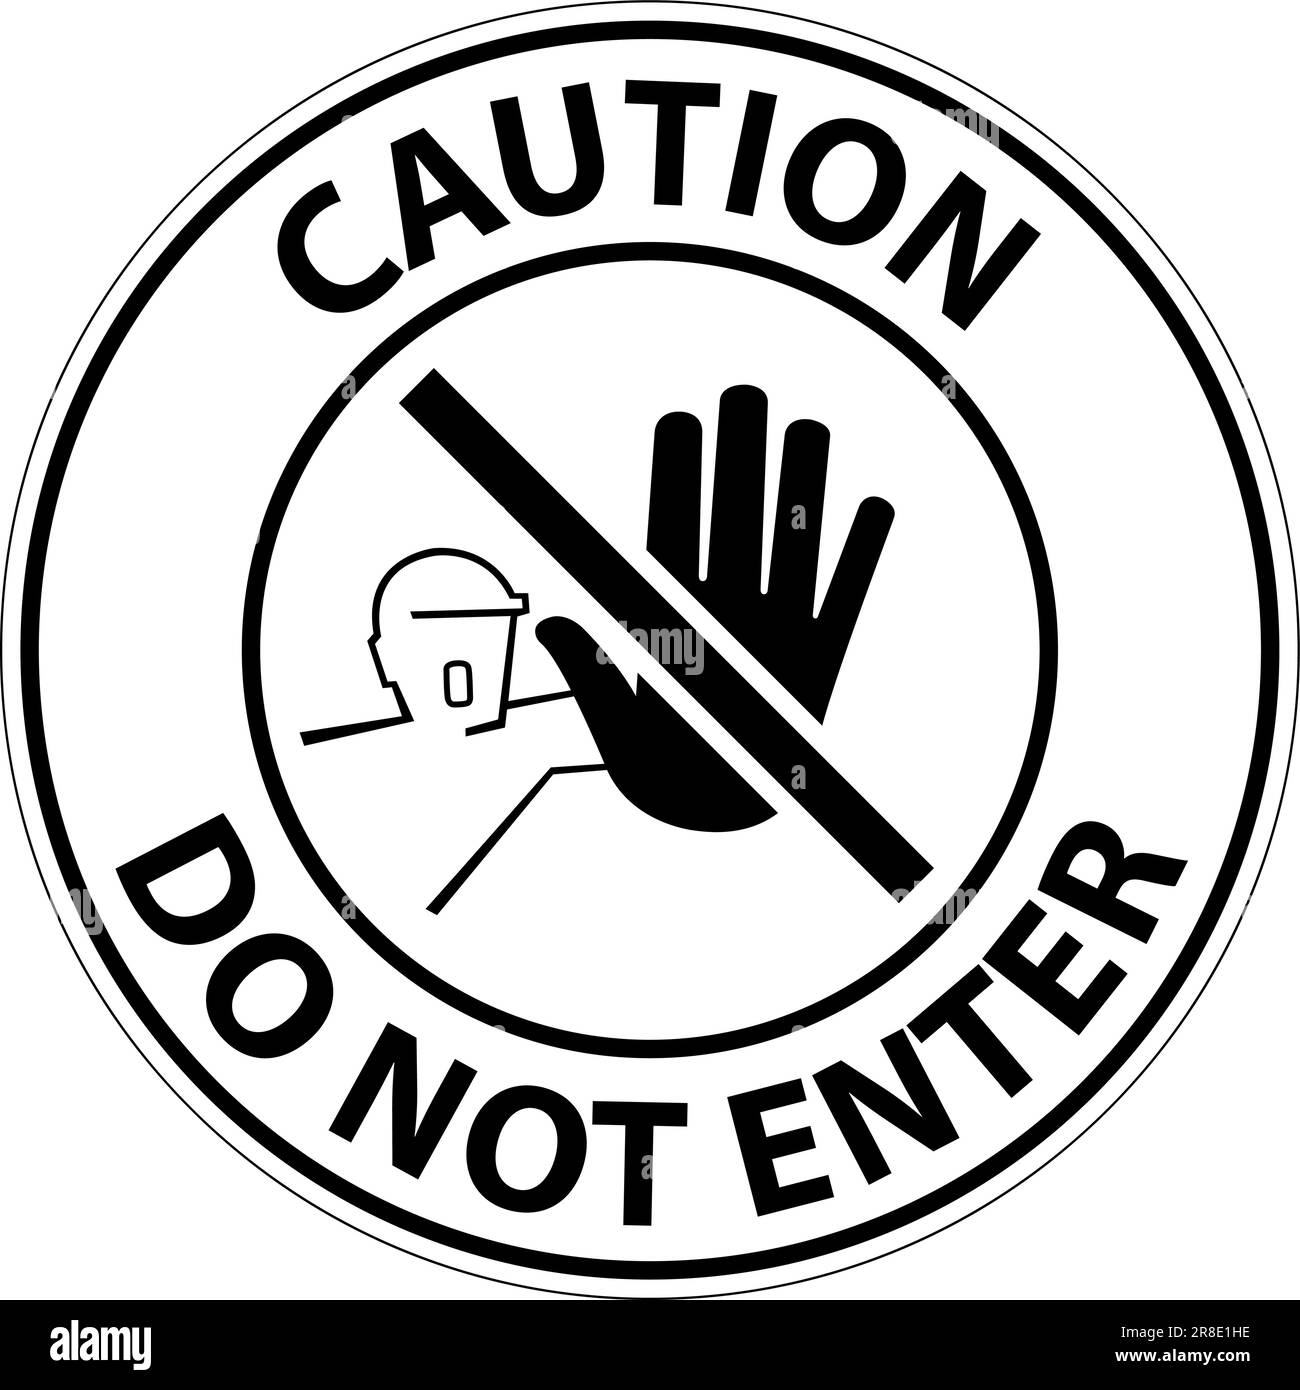 Caution Do Not Enter Symbol Sign On White Background Stock Vector Image